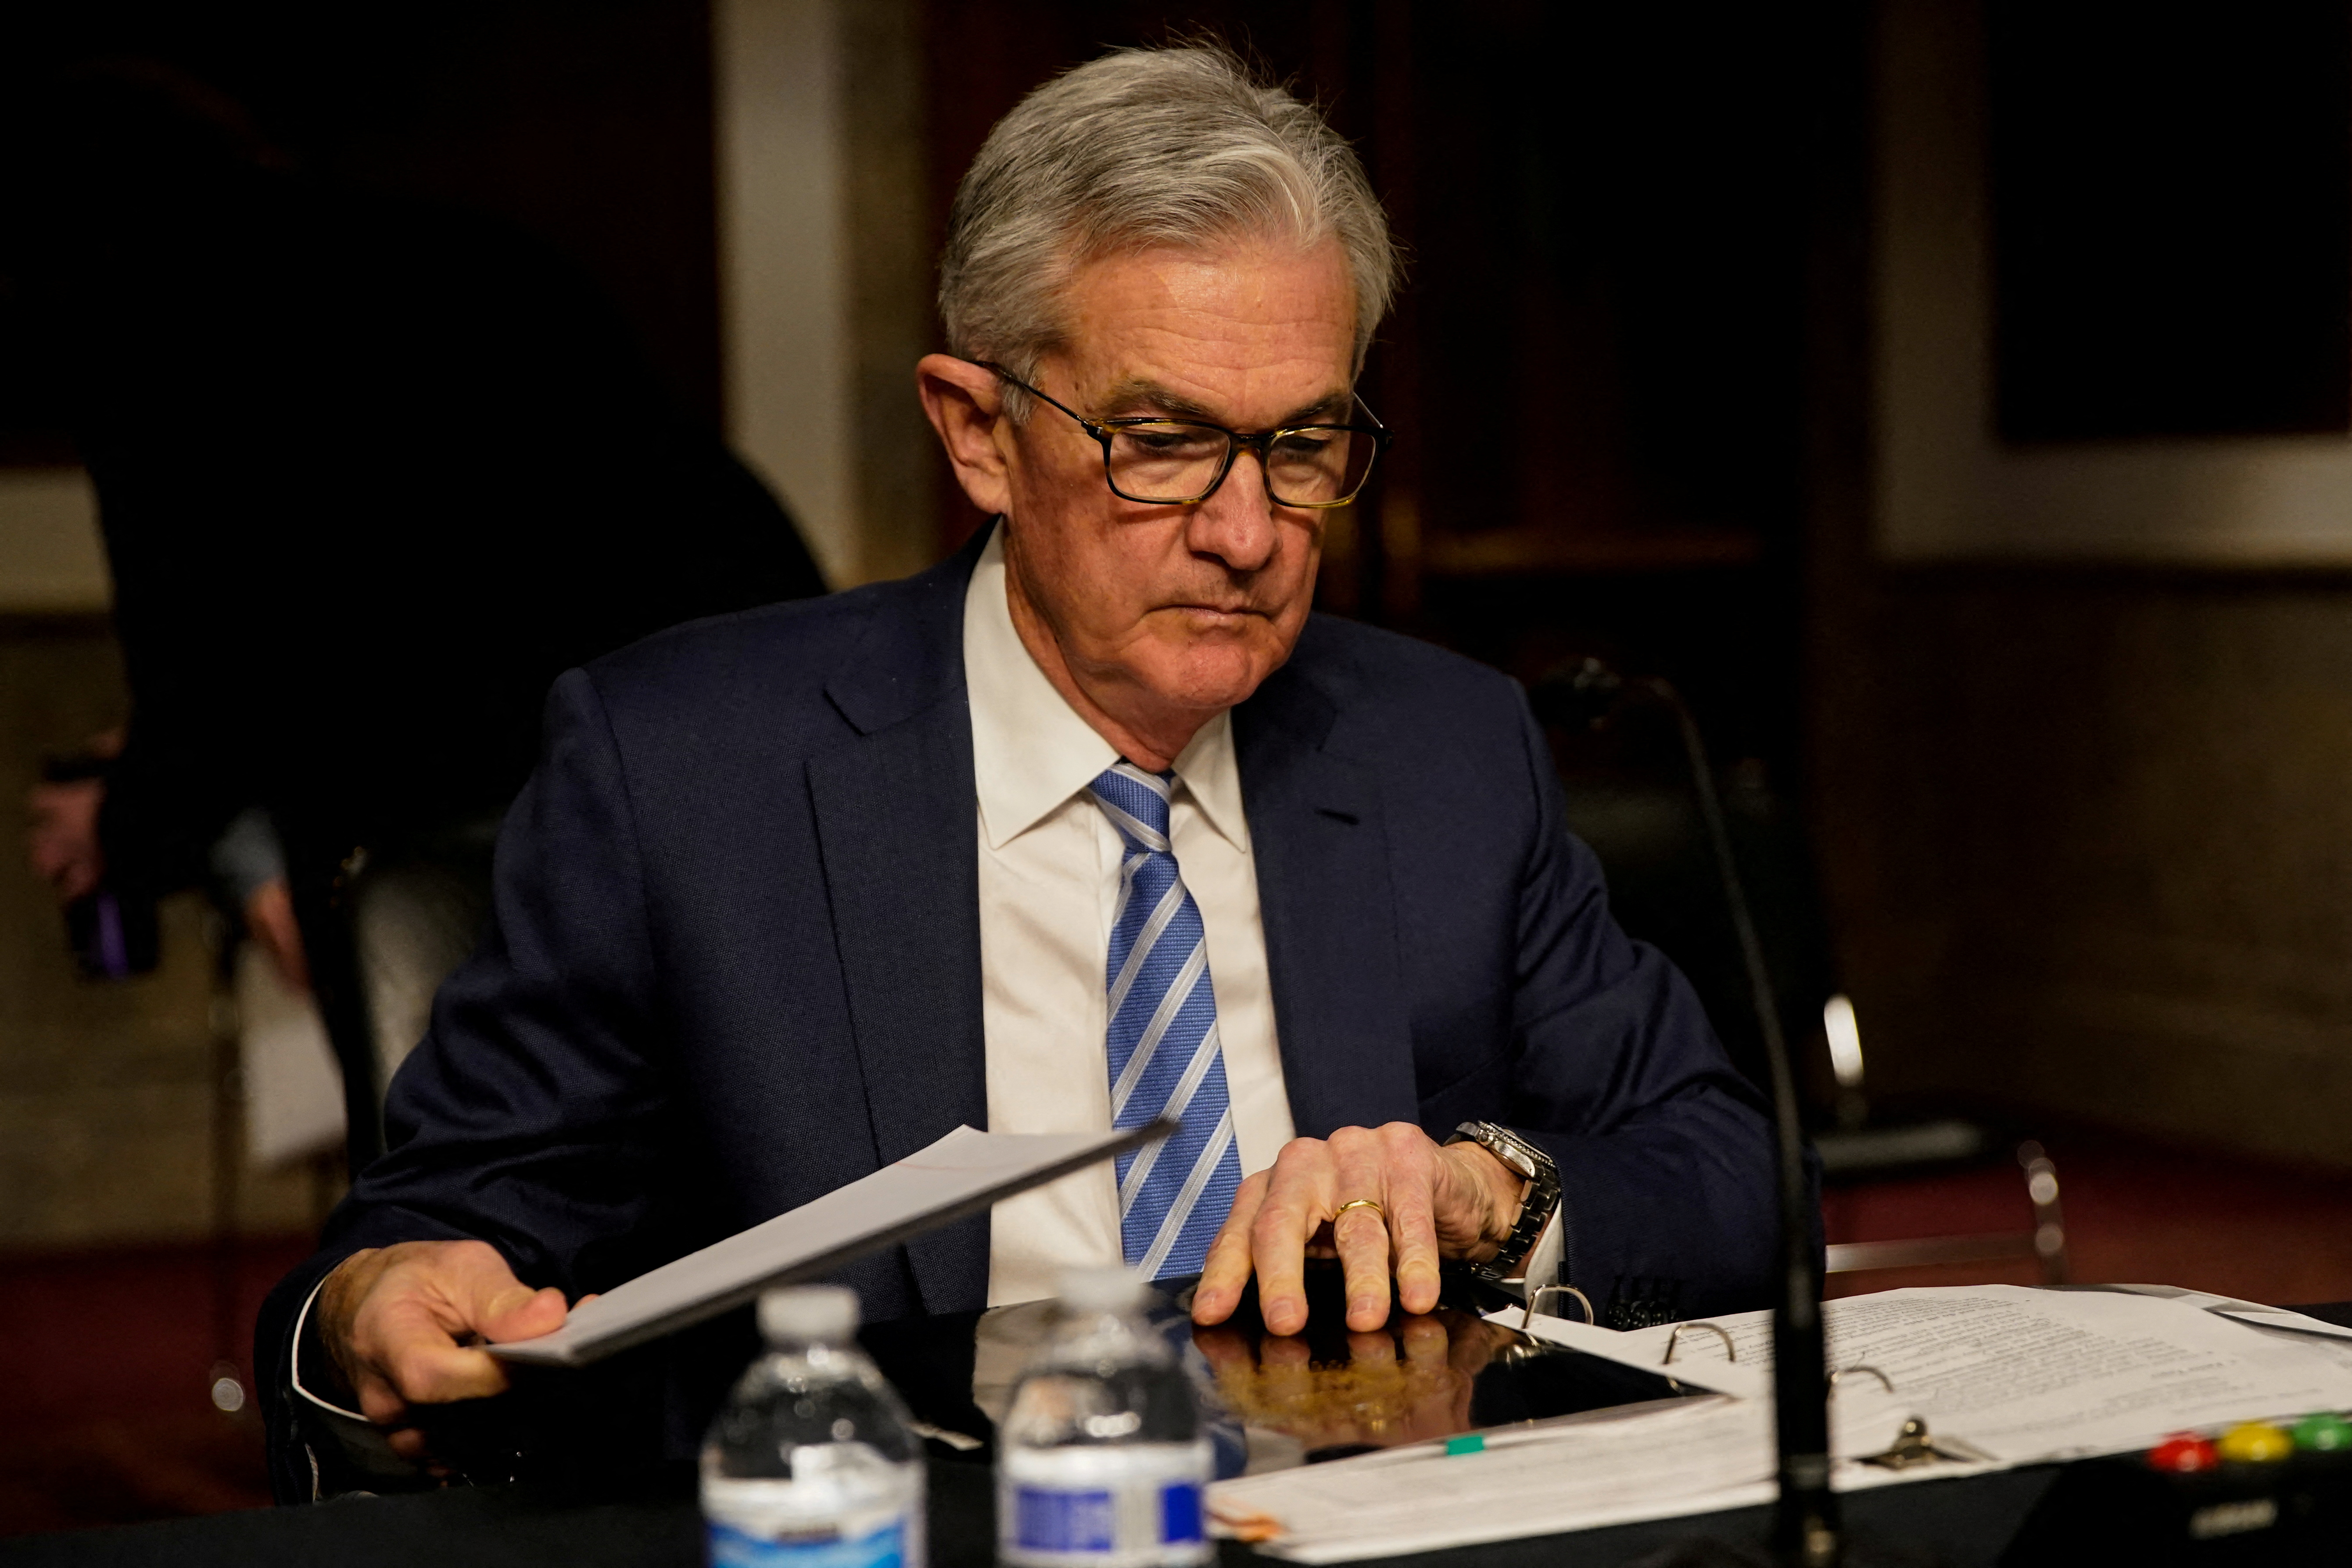 Federal Reserve Chair Jerome Powell testifies before a Senate Banking Committee hybrid hearing on oversight of the Treasury Department and the Federal Reserve on Capitol Hill in Washington